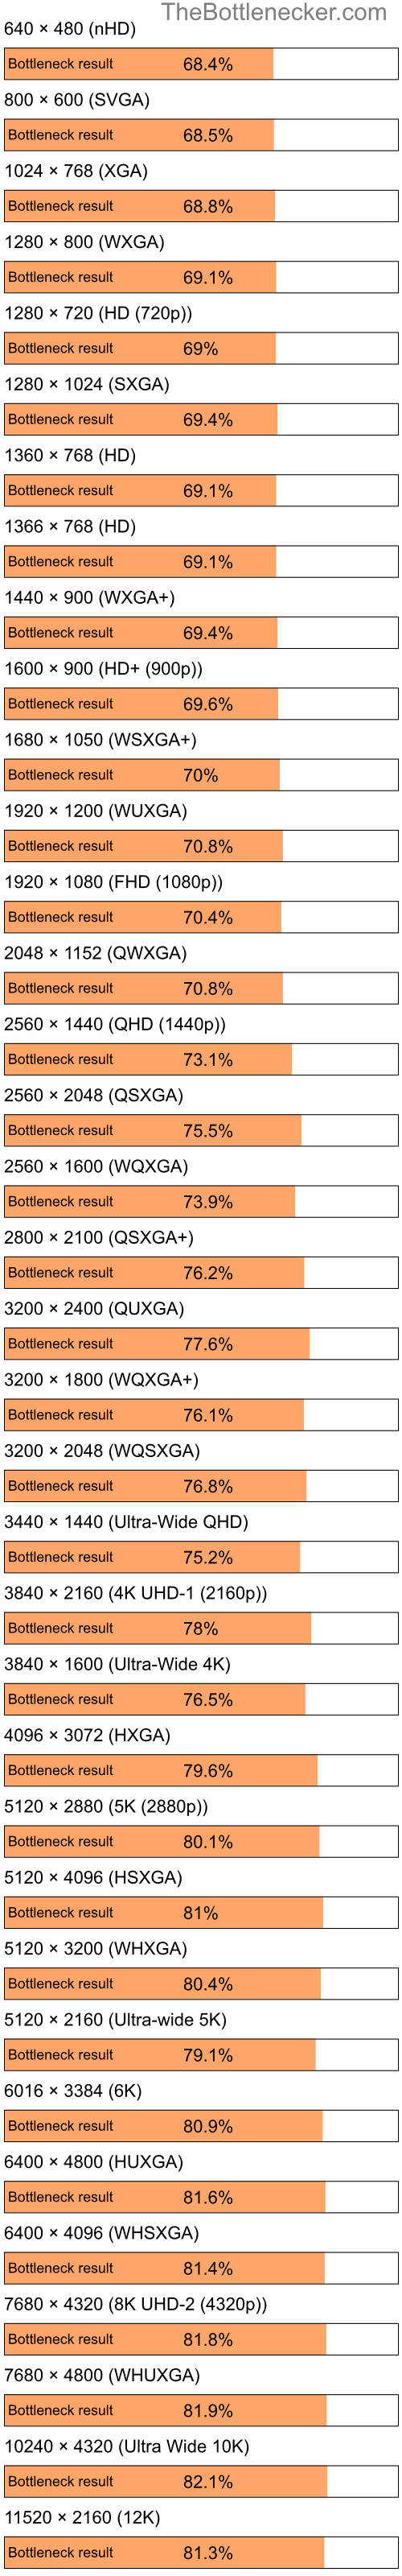 Bottleneck results by resolution for Intel Pentium 4 and NVIDIA GeForce 6500 in Processor Intense Tasks